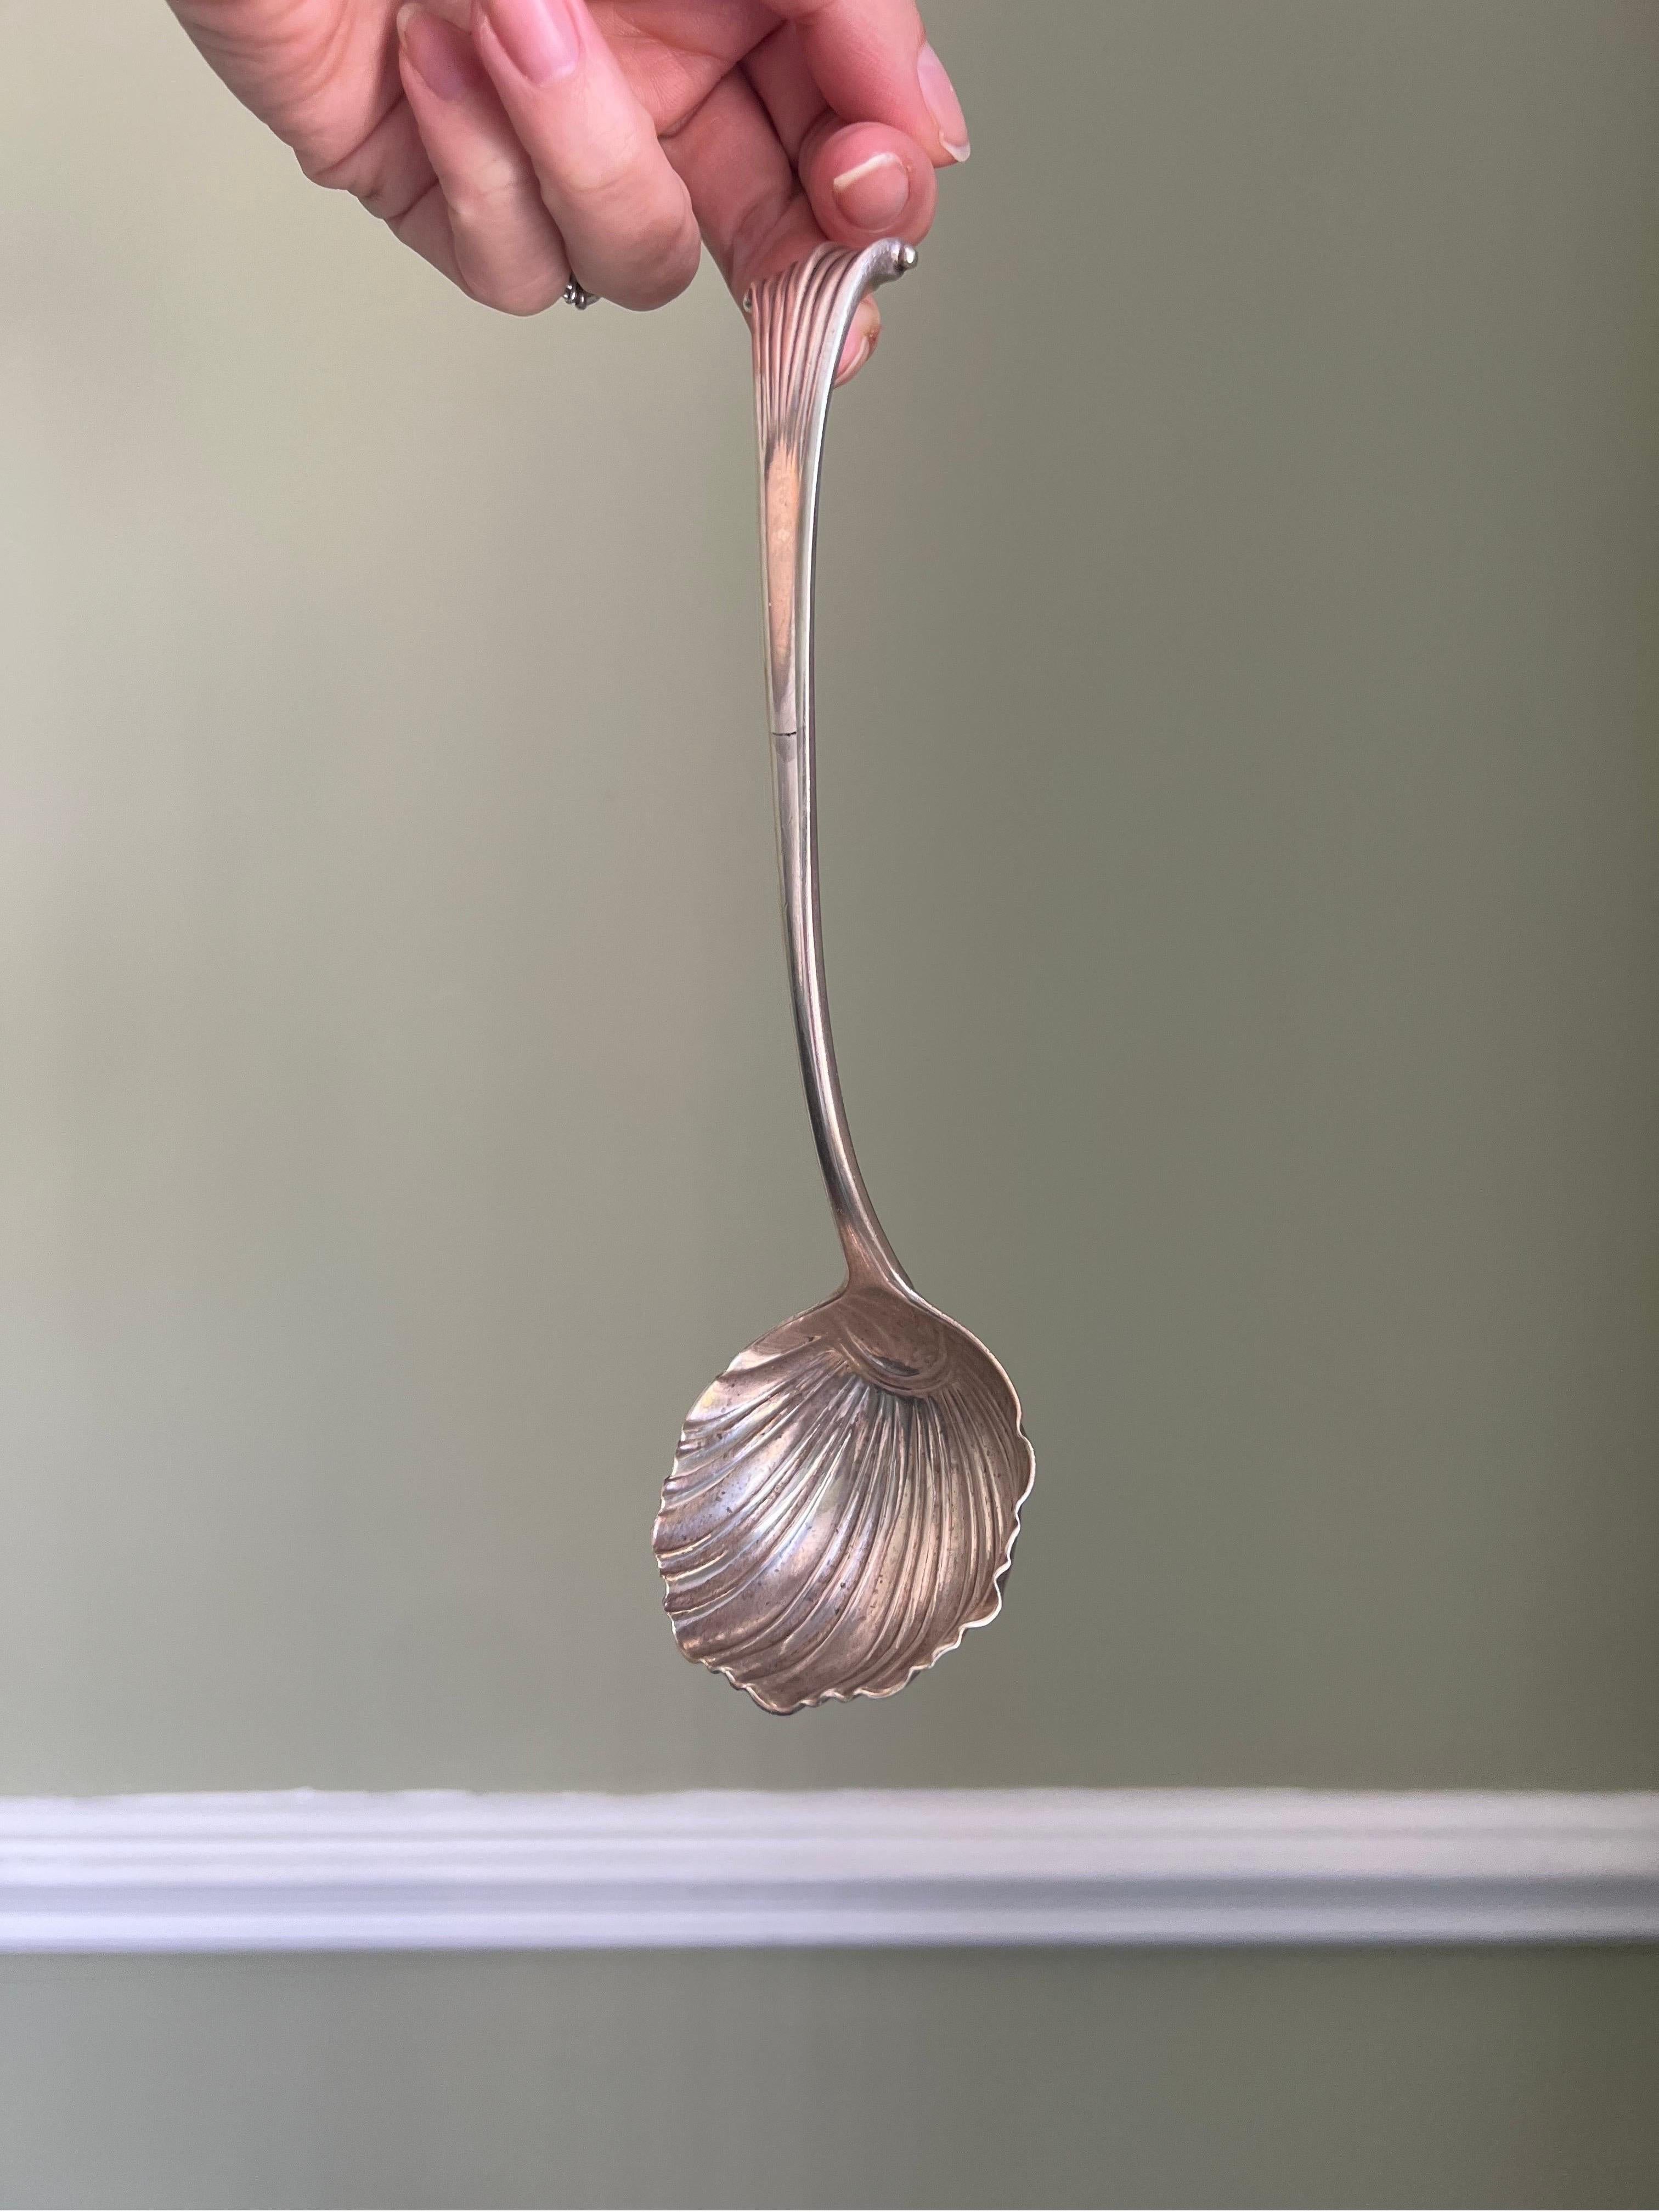 Mr. Giallo is opening his personal vault to sell a collection of his treasured antiques he's held on for so long.

ABOUT ITEM.
1765 George III Silver Onslow Pattern Small Ladle. Item originally bought by Vito at Sotheby's auction, circa 1970s.